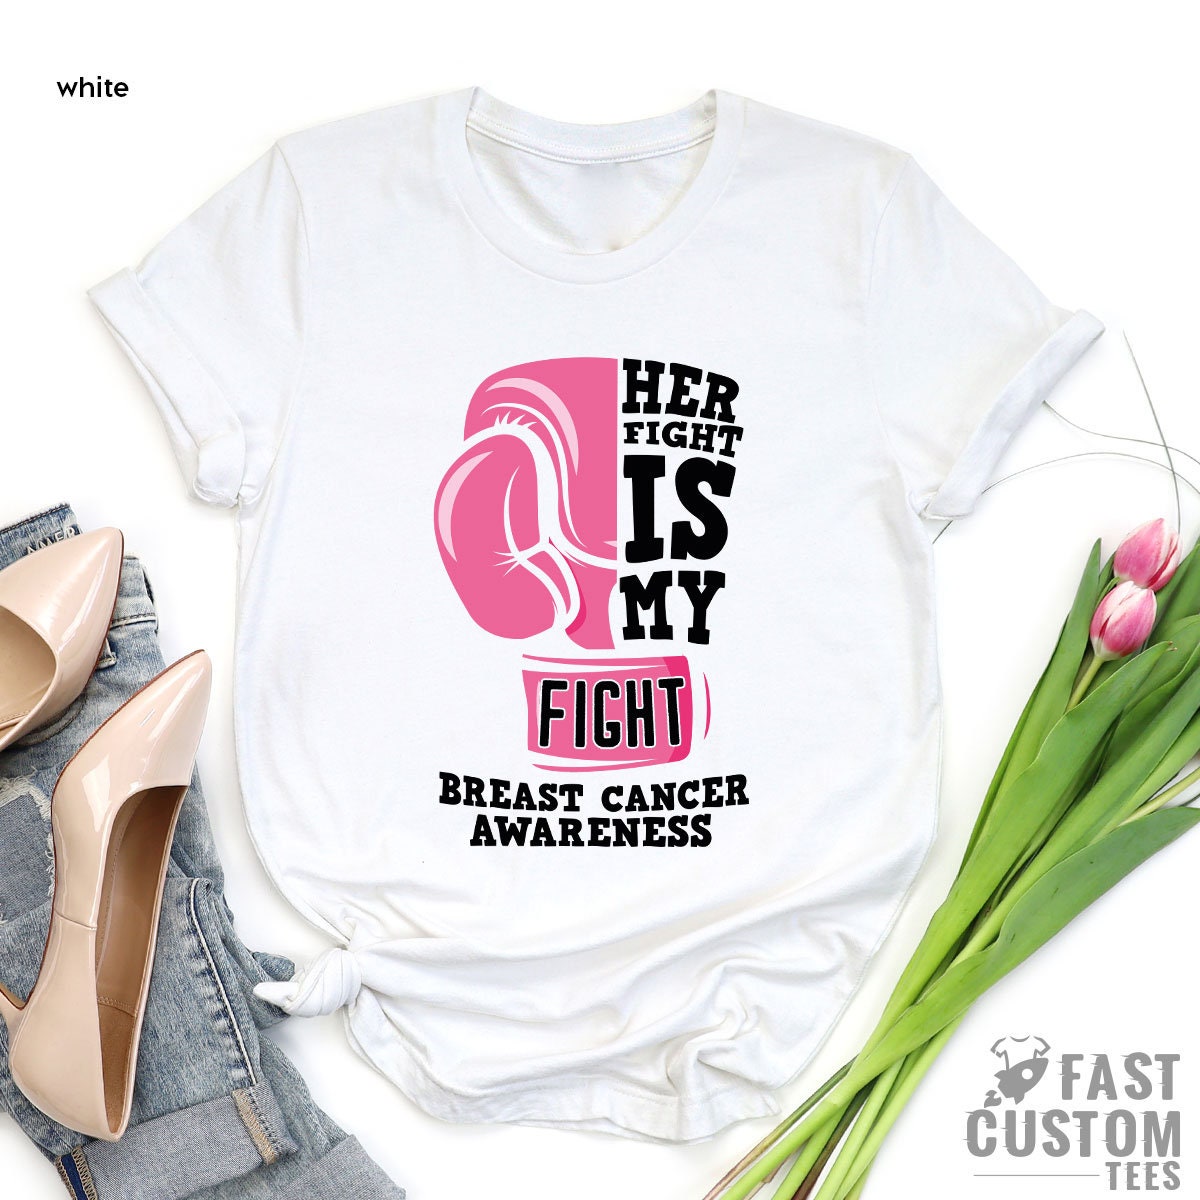 Cancer Support Shirt, Cancer Awareness T-Shirt, Her Fight Is Our Fight Shirt, Motivational T Shirt, Cancer Ribbon Tee,Breast Cancer Shirt - Fastdeliverytees.com